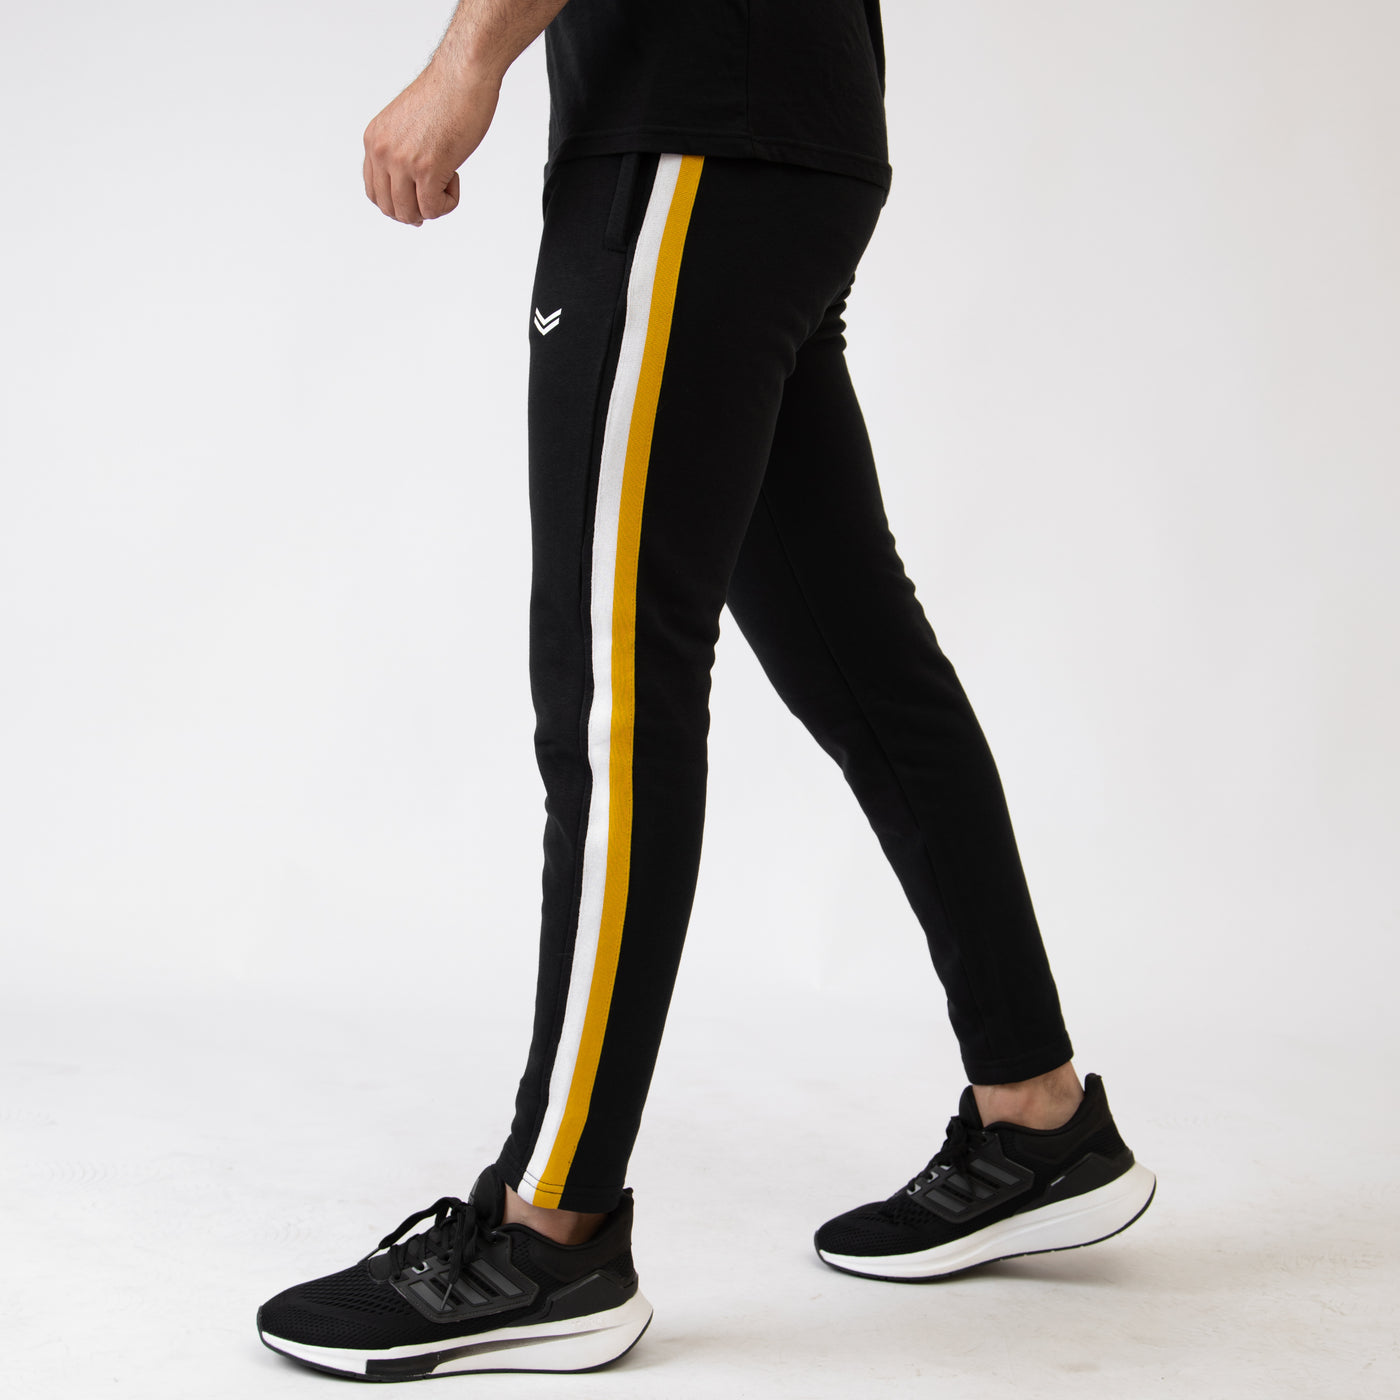 Black Bottoms with White & Mustard Side Tape